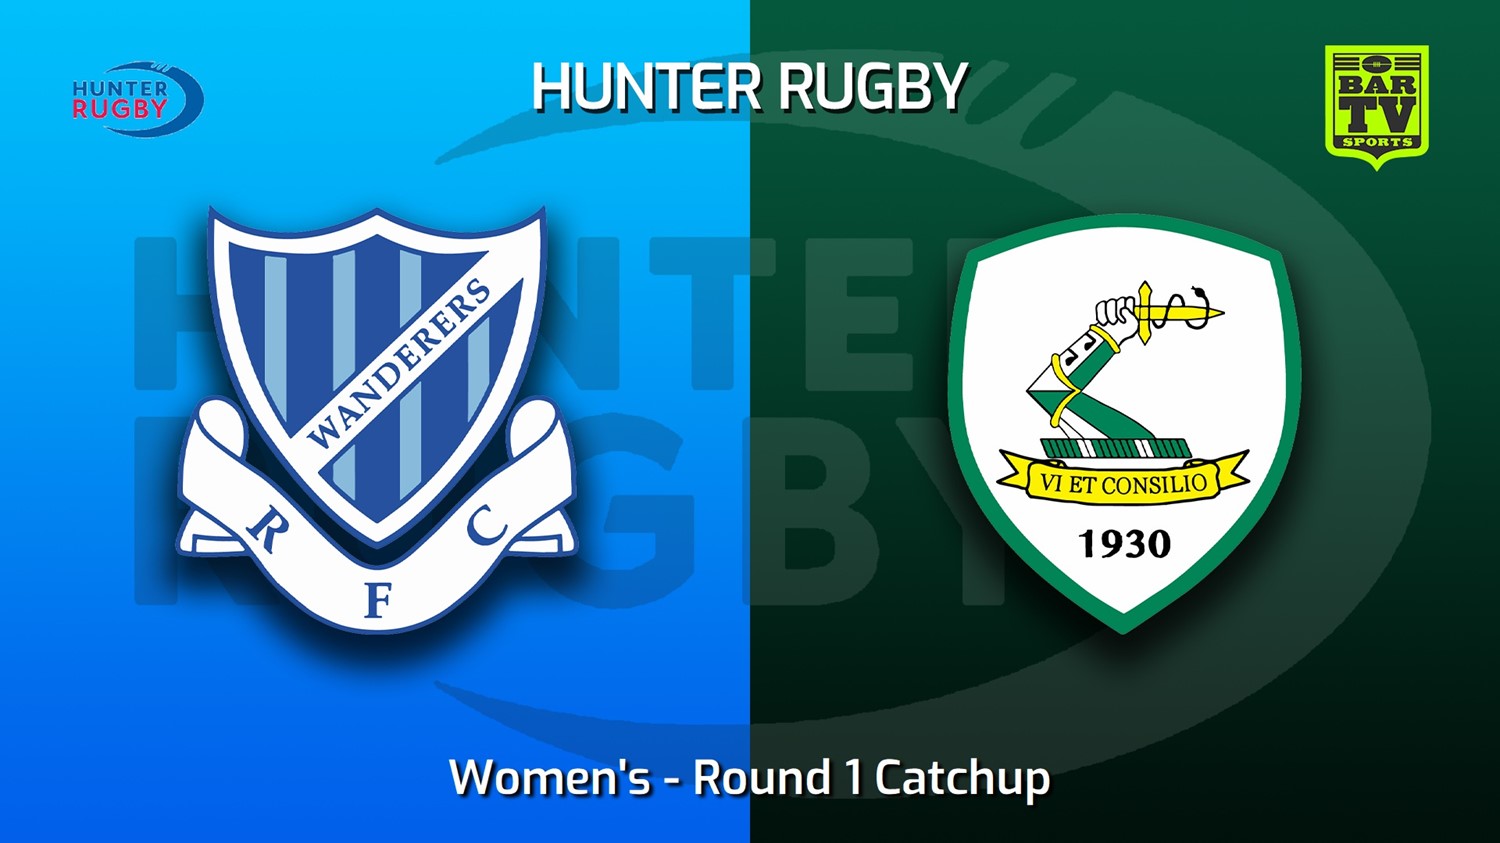 220726-Hunter Rugby Round 1 Catchup - Women's - Wanderers v Merewether Carlton Slate Image